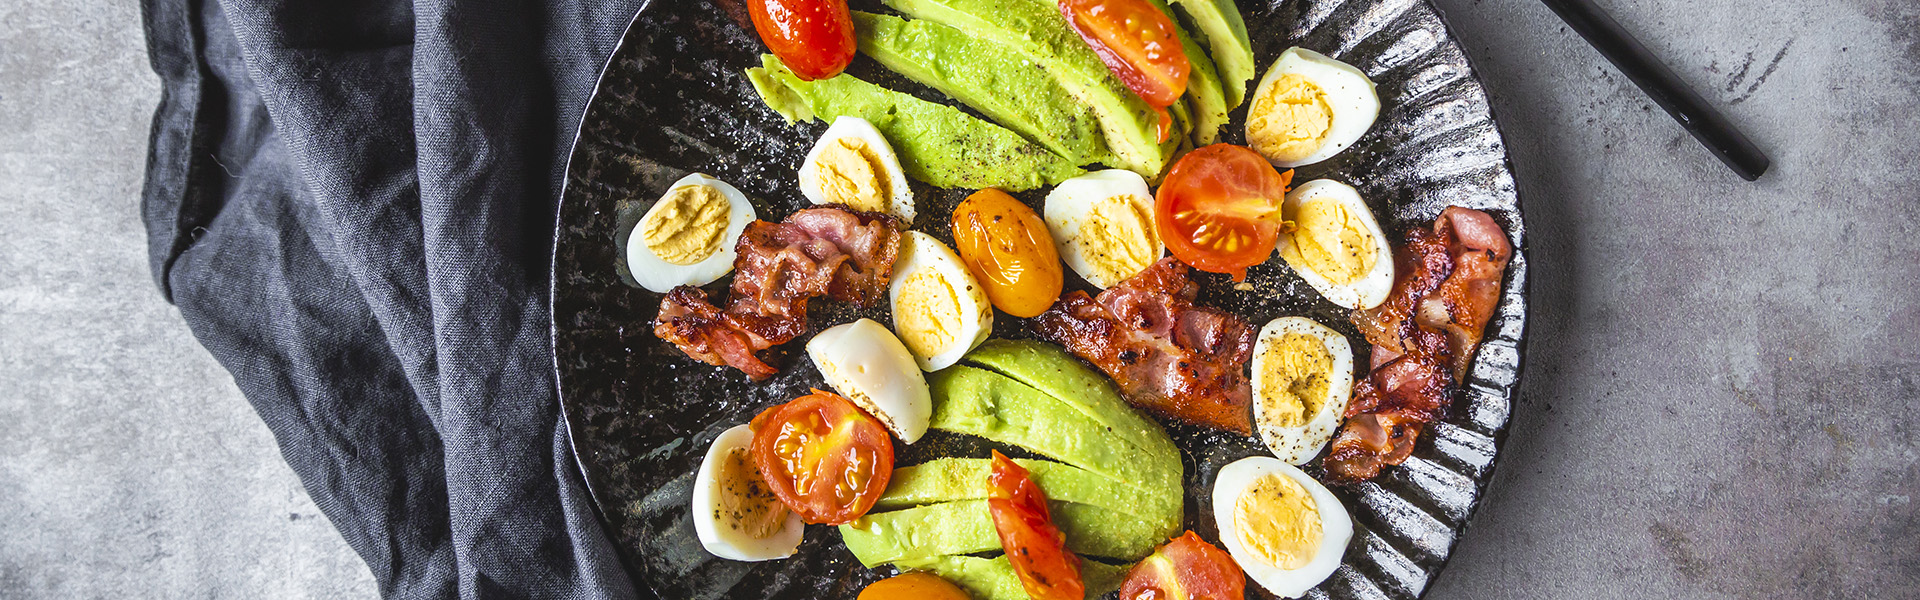 The keto diet and its health benefits